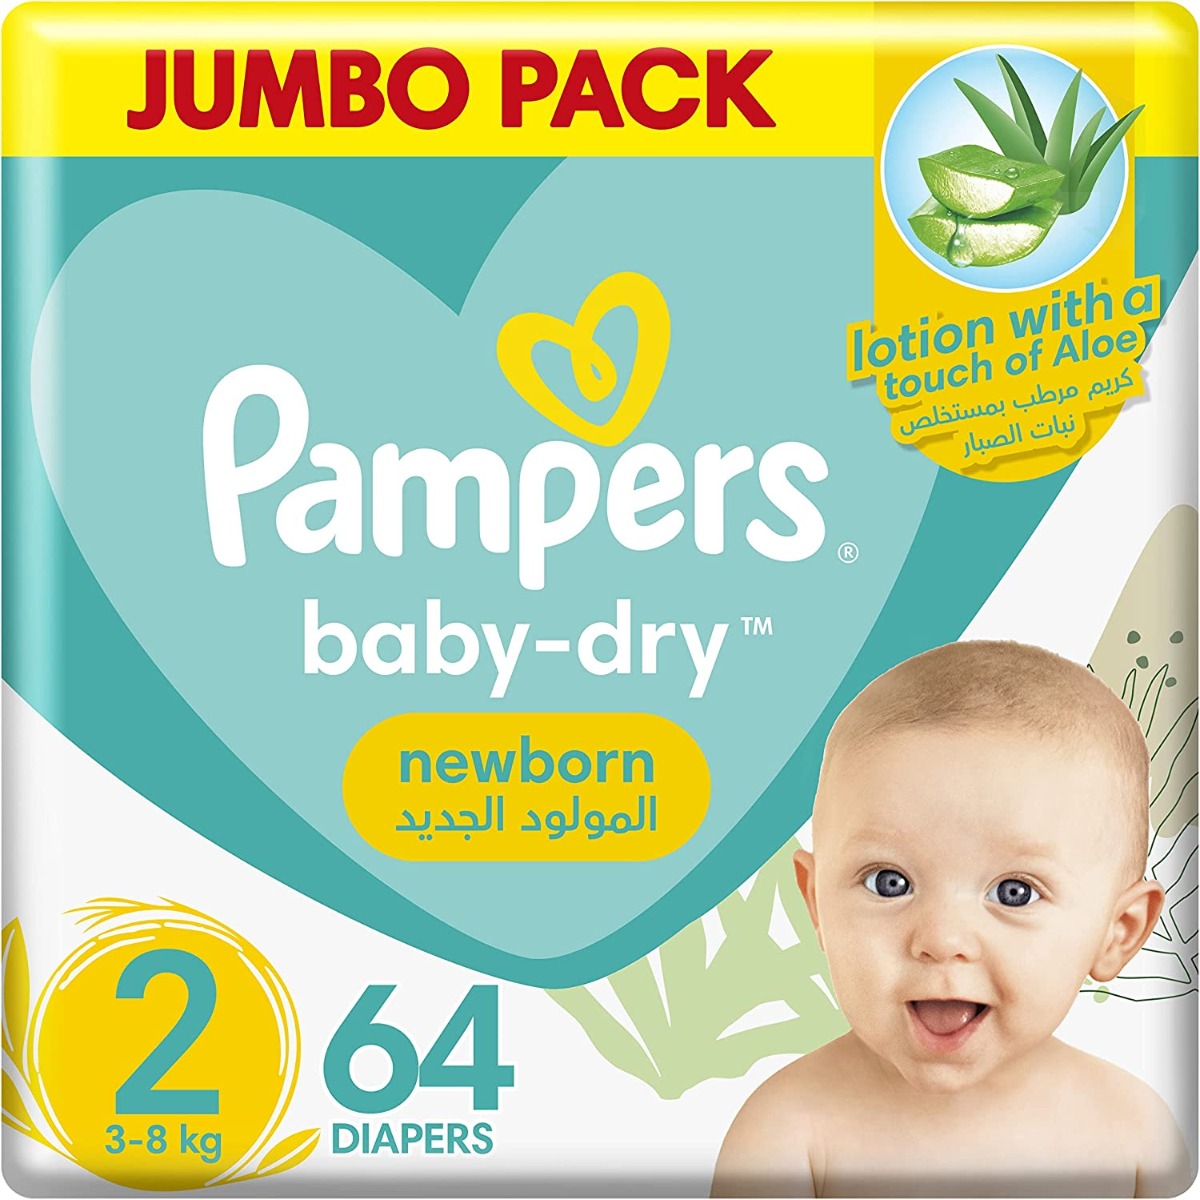 Pampers - New Baby-Dry Diapers, Size 2, Mini, 3-8 Kg, Jumbo Pack - 64 Pcs